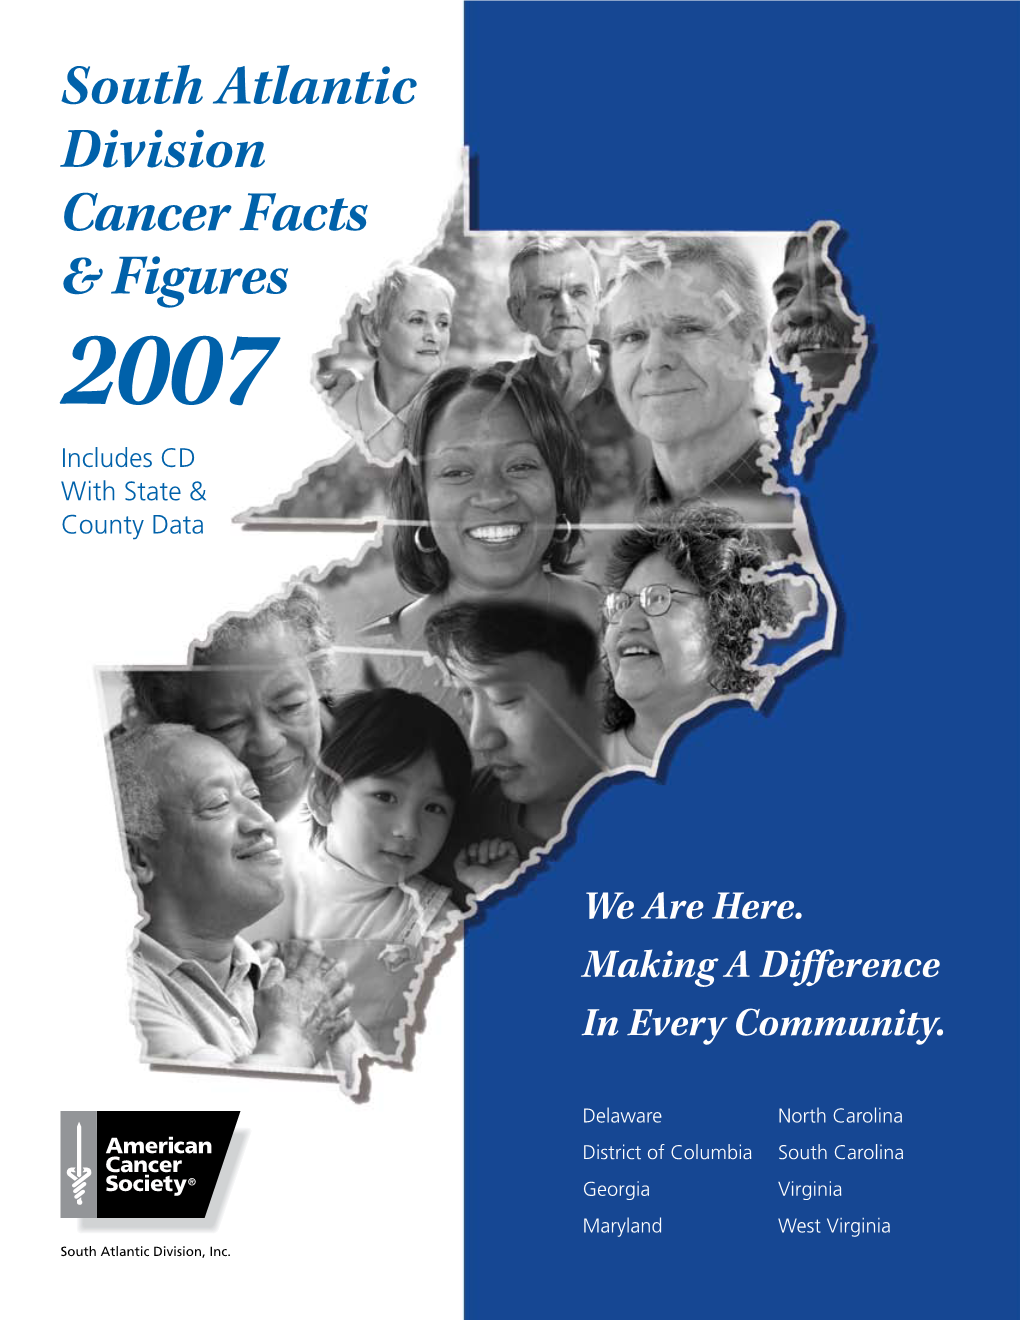 ACS South Atlantic Division Cancer Facts & Figures, 2007